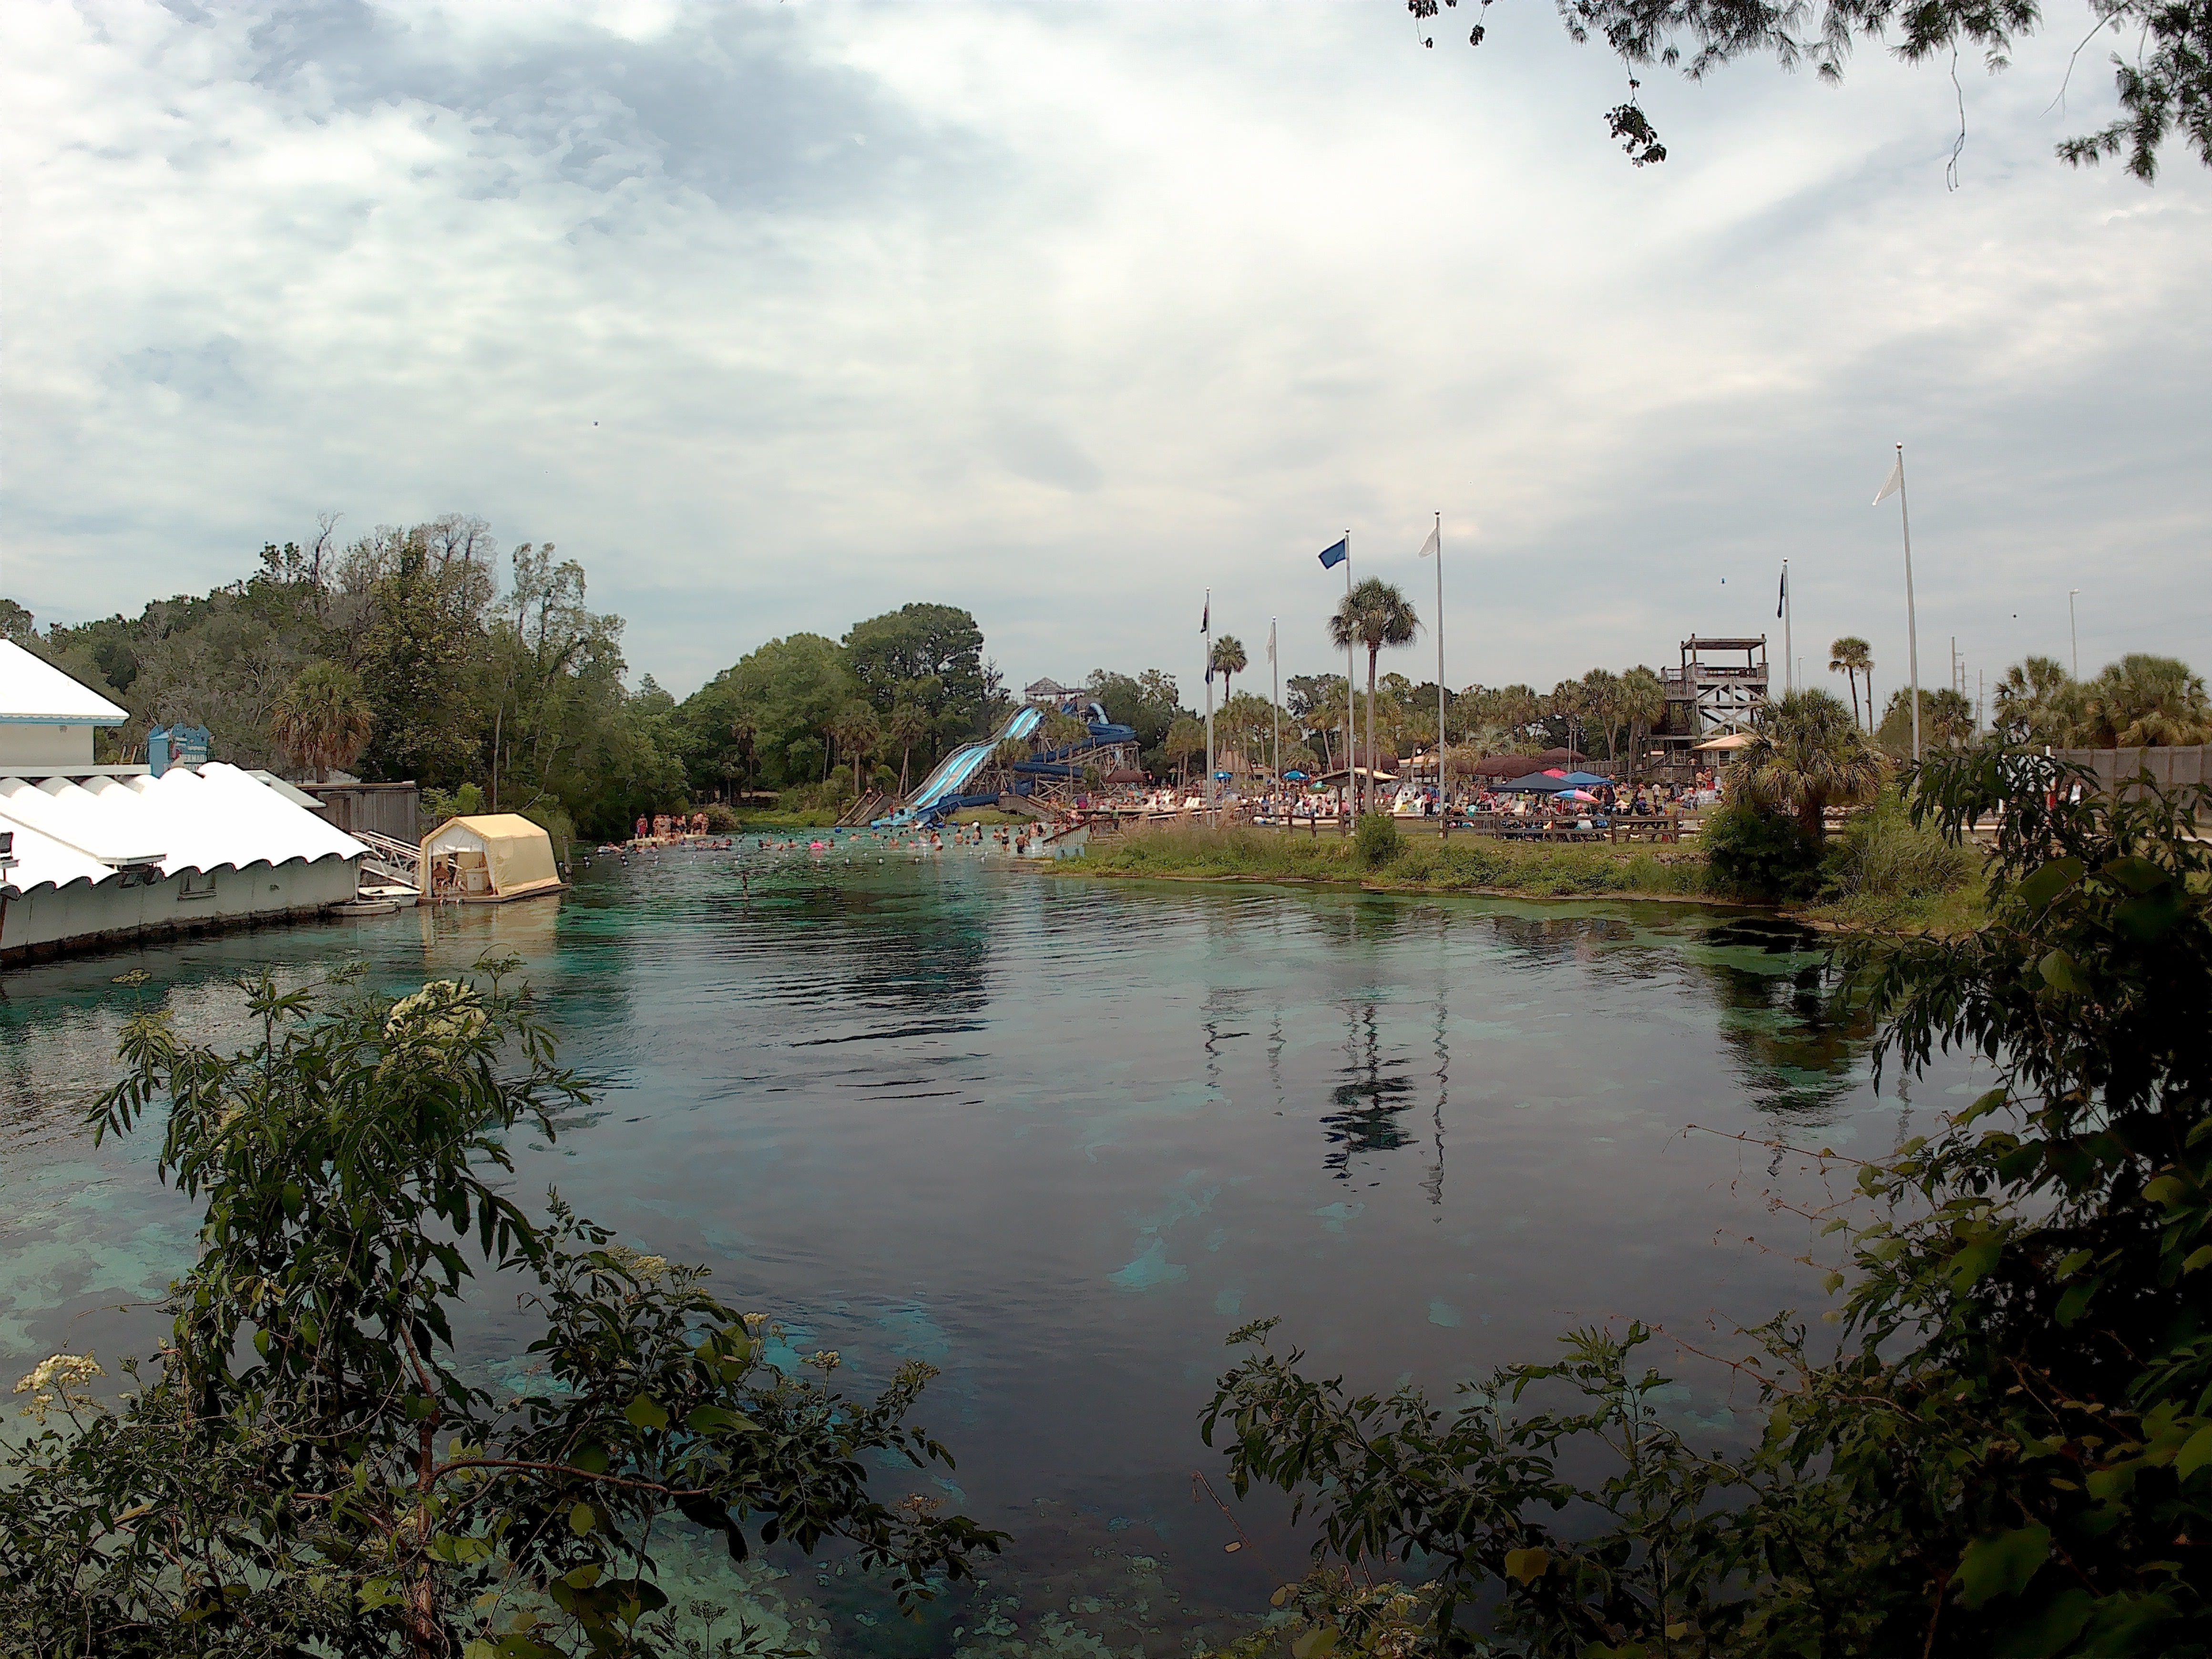 A wide view of the waterpark at Weeki Wachee